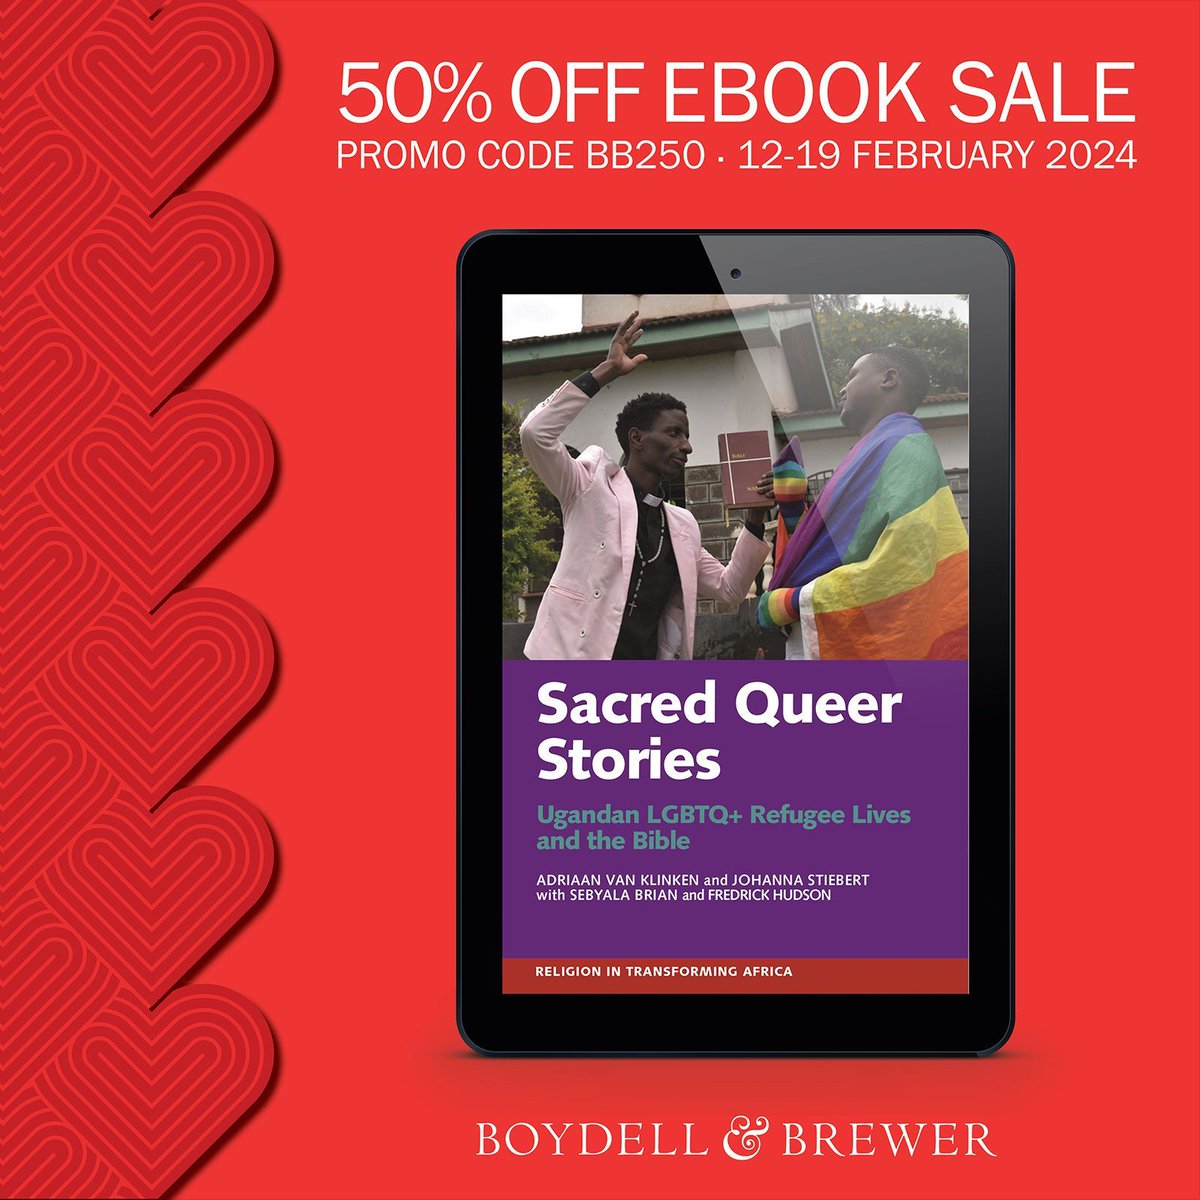 Sacred Queer Stories explores how biblical stories affirm the experiences of Ugandan LGBTQ+ refugees: their struggle, their hopes & their faith in God and humanity. Save 50% with code BB250 during our #ebooksale: buff.ly/3uysN76 @JoiStie20 @AdriaanvKlinken @drstellanyanzi